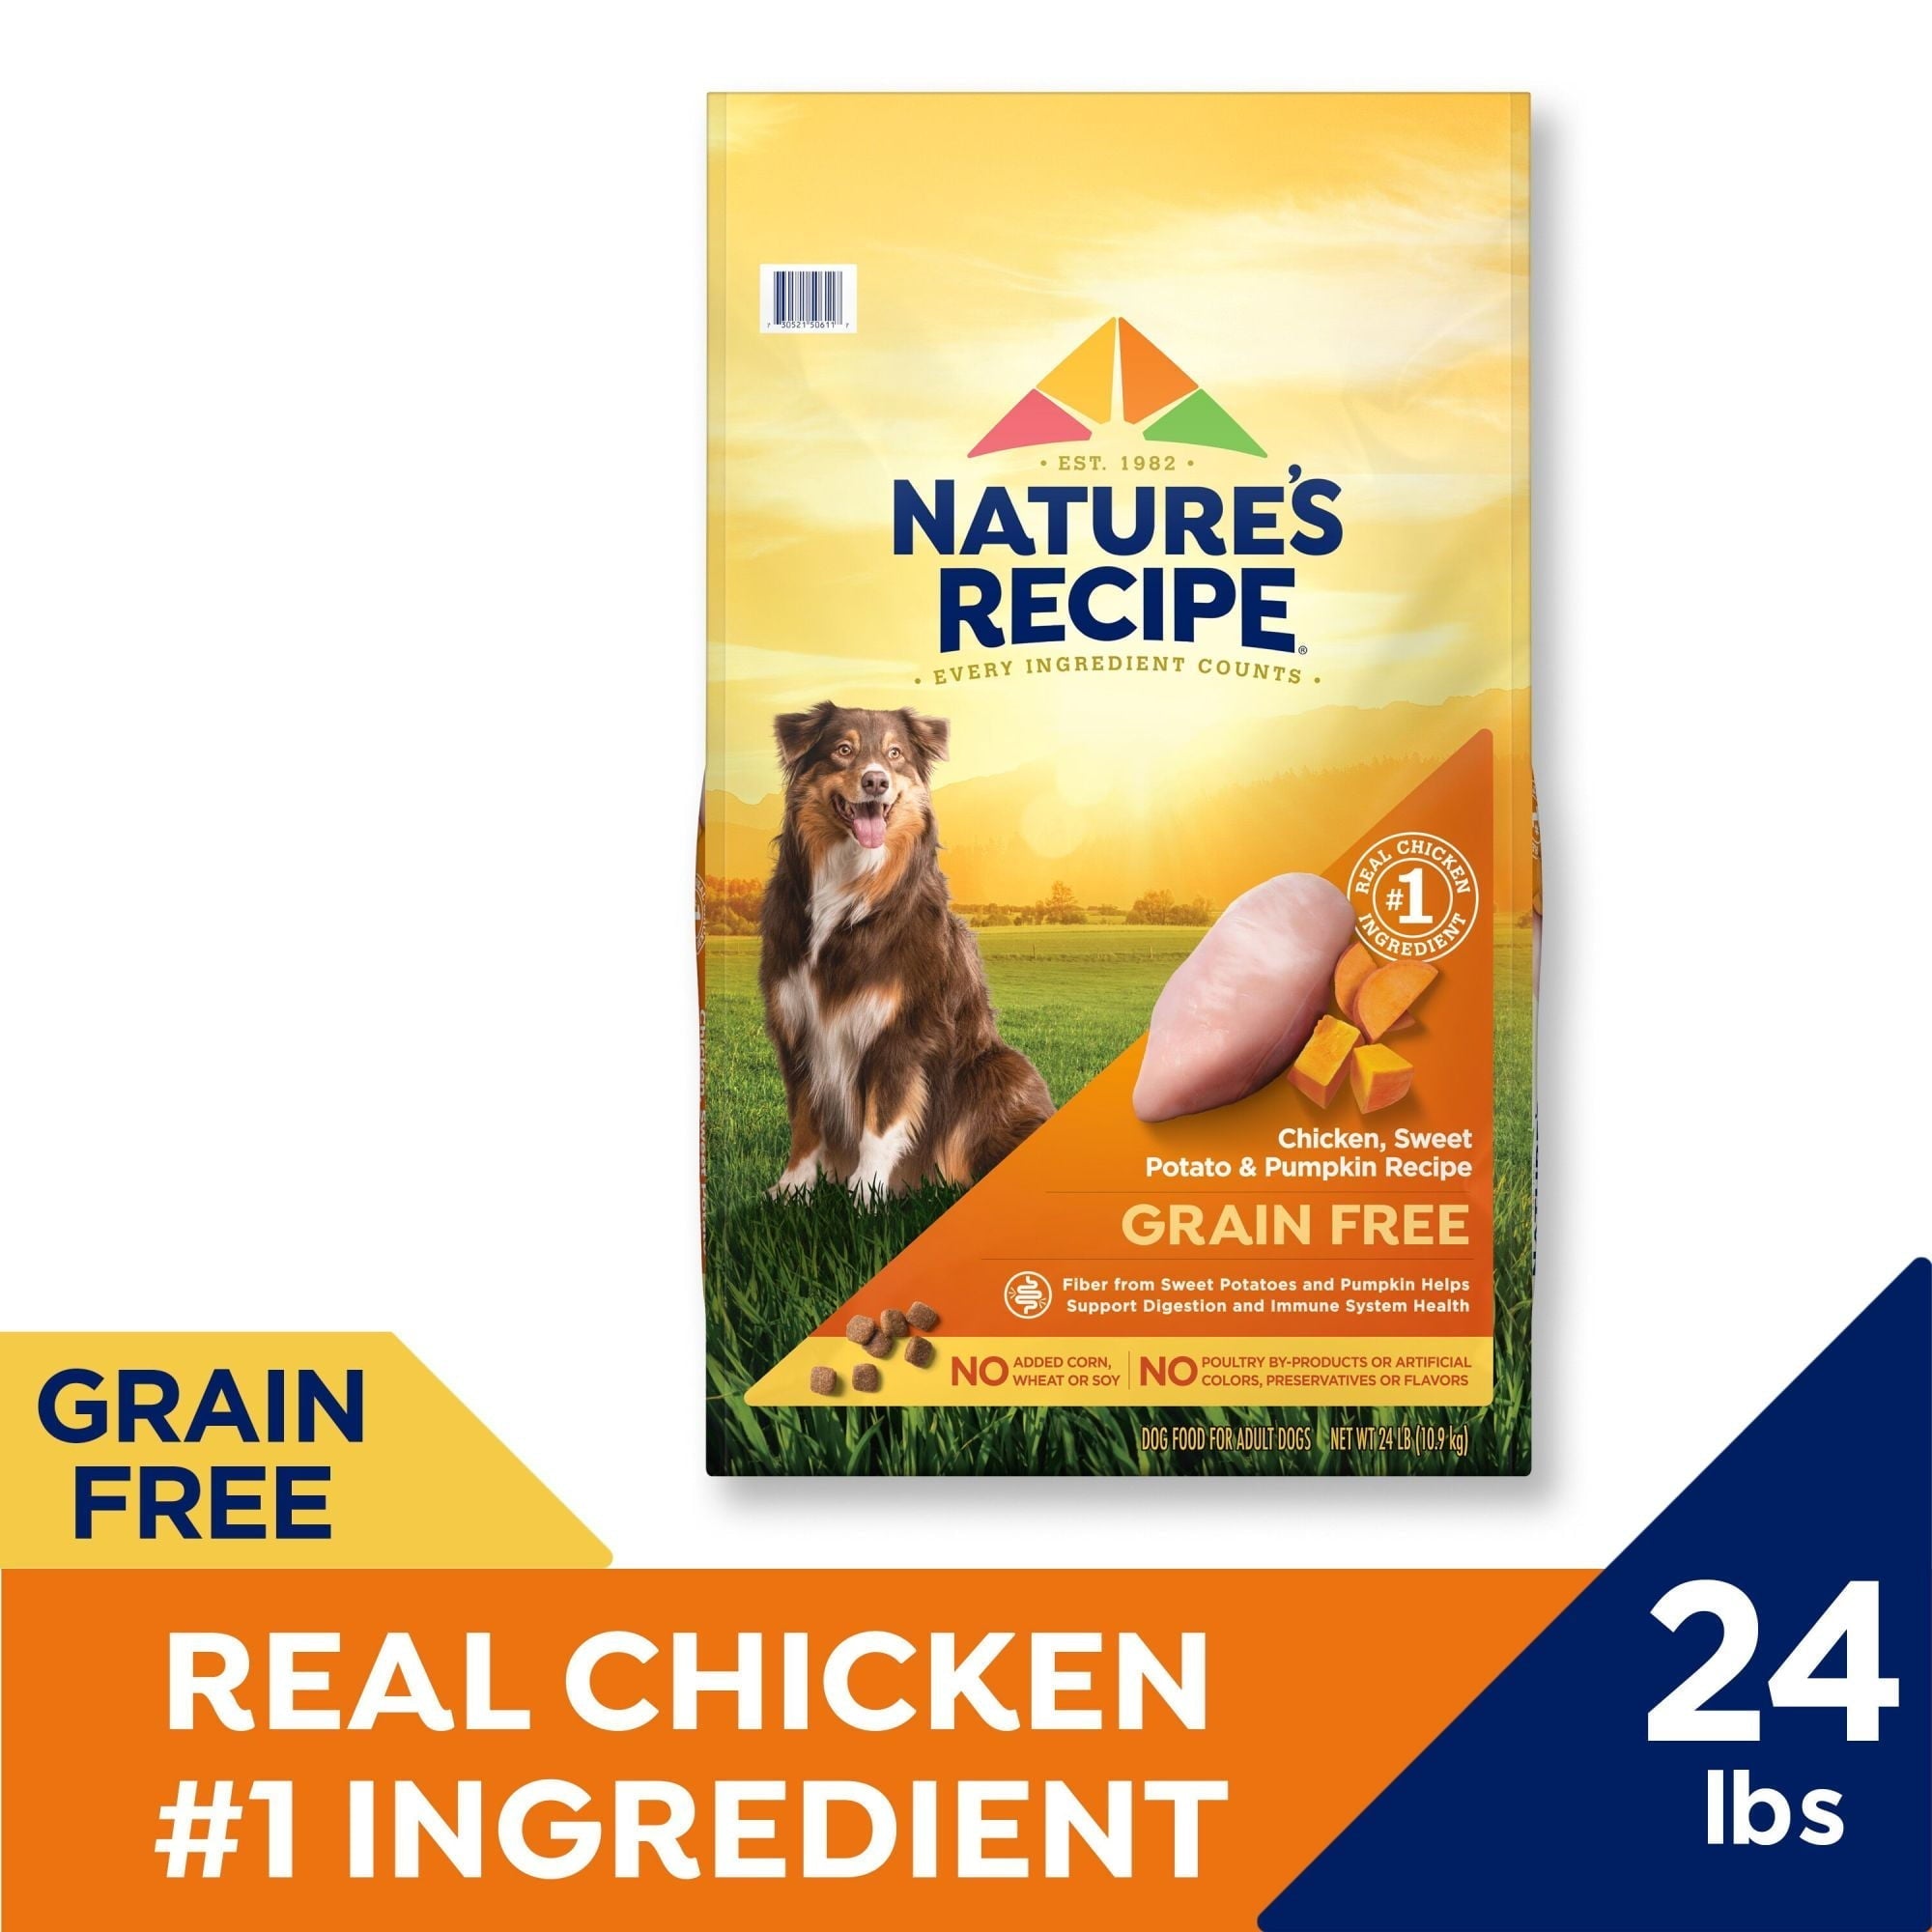 Wholesale prices with free shipping all over United States Nature′s Recipe Dry Dog Food, Grain Free Small Breed Chicken, Sweet Potato & Pumpkin Recipe, 12 lb. Bag - Steven Deals